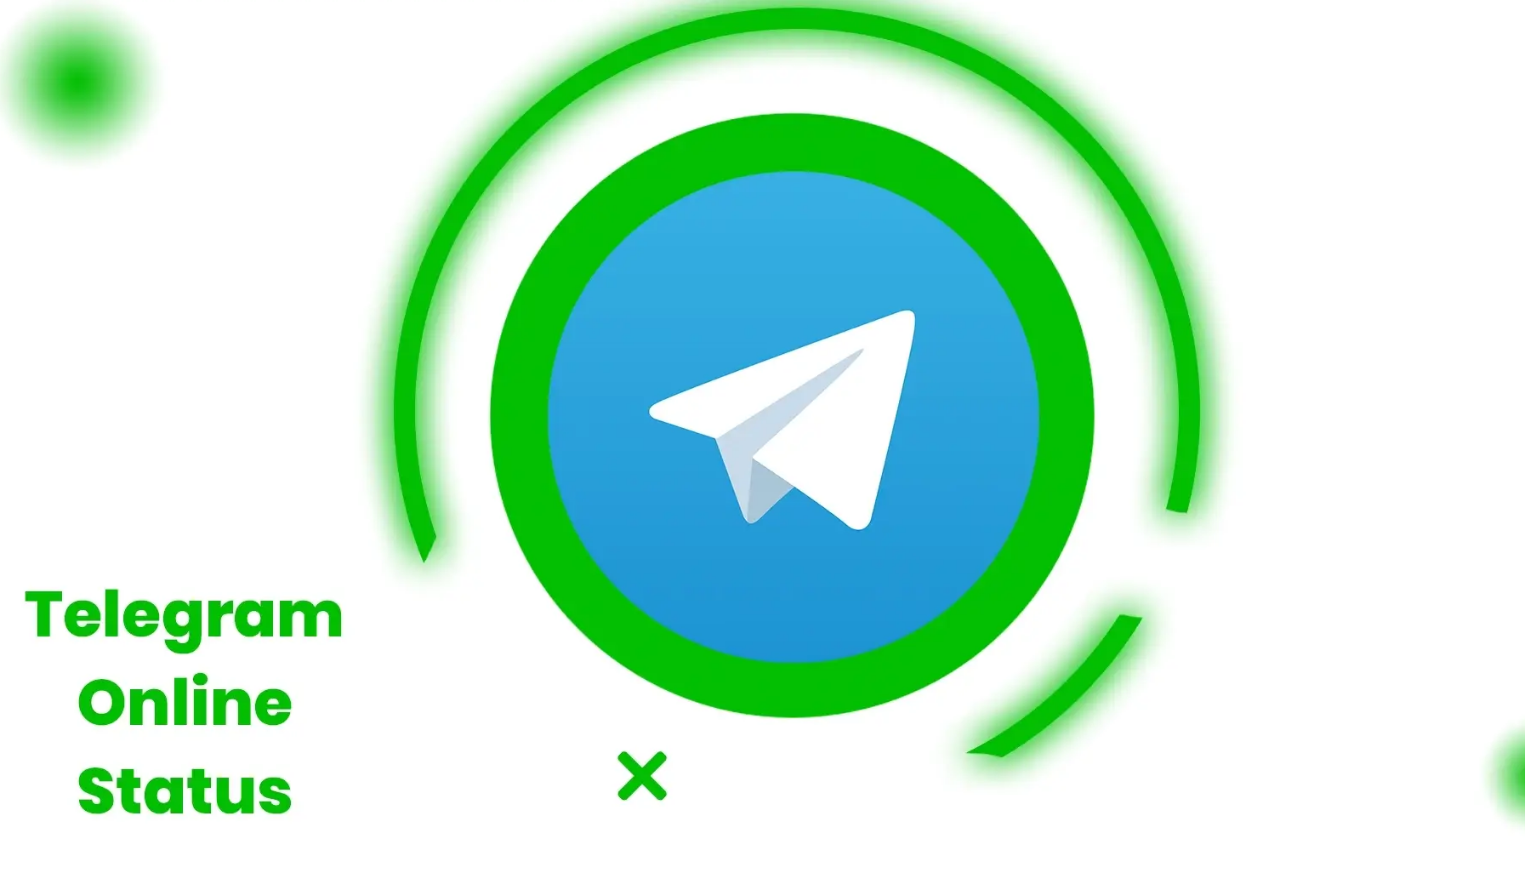 What is The Telegram Online Status Feature and how it work